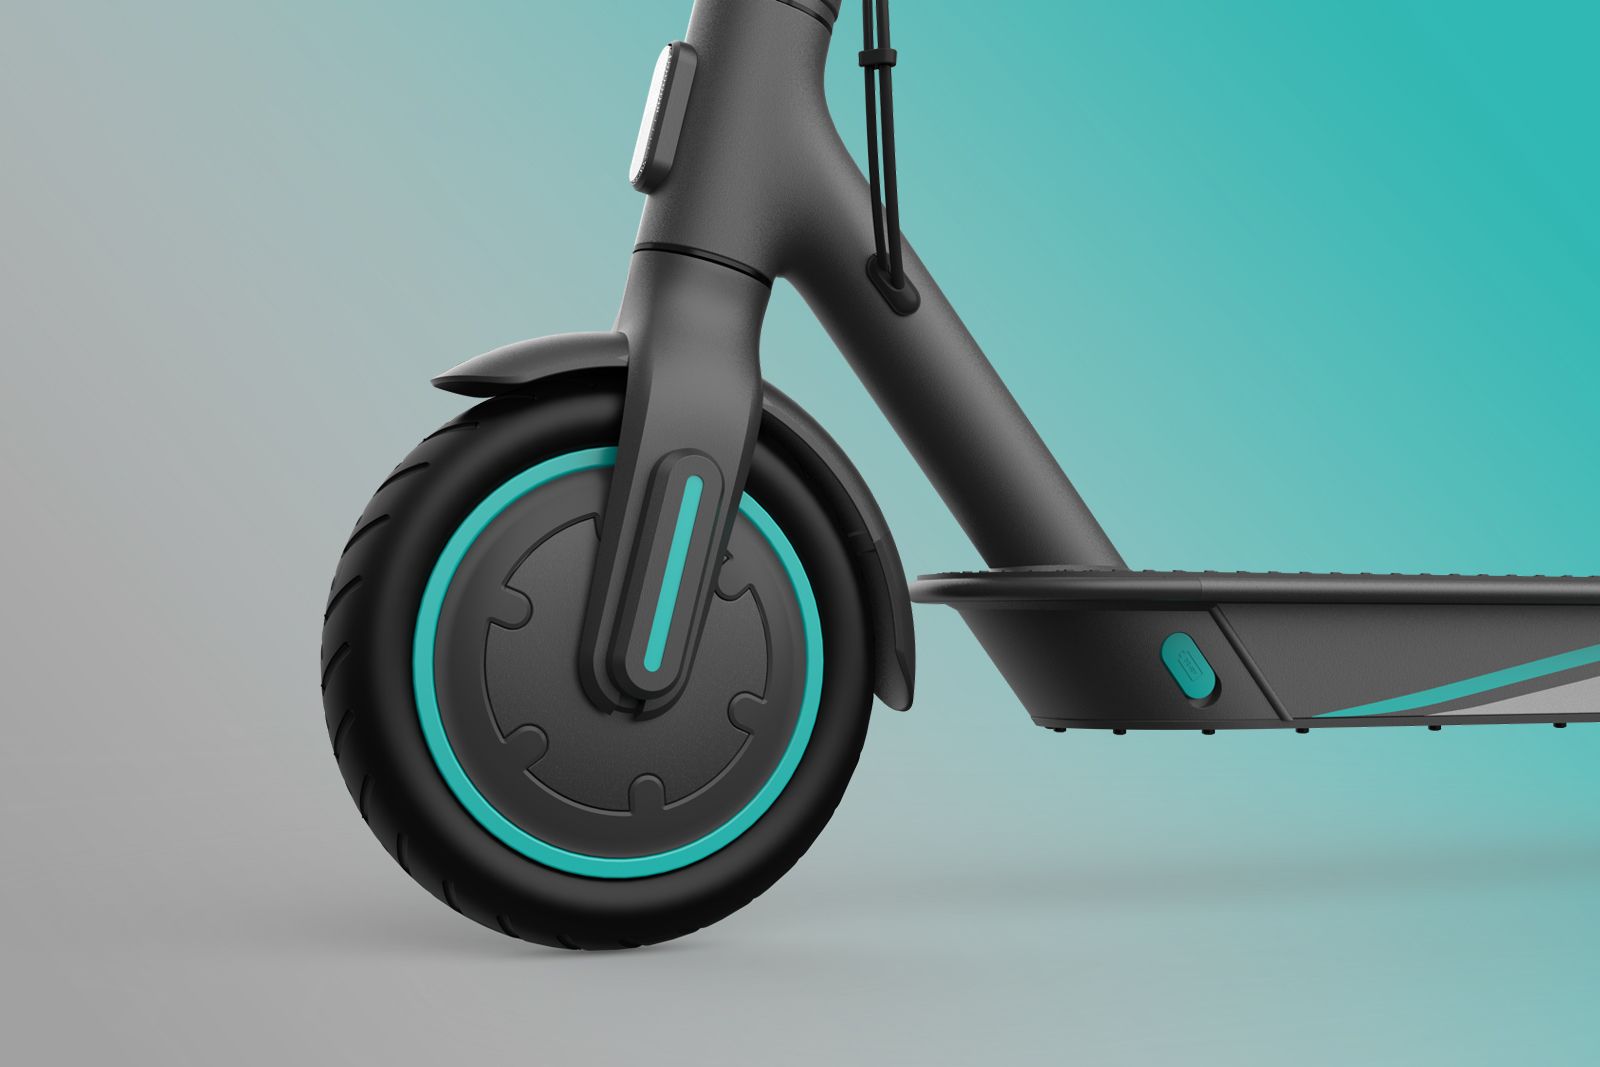 There's now a Mercedes-AMG Petronas F1 electric scooter from Xiaomi photo 2